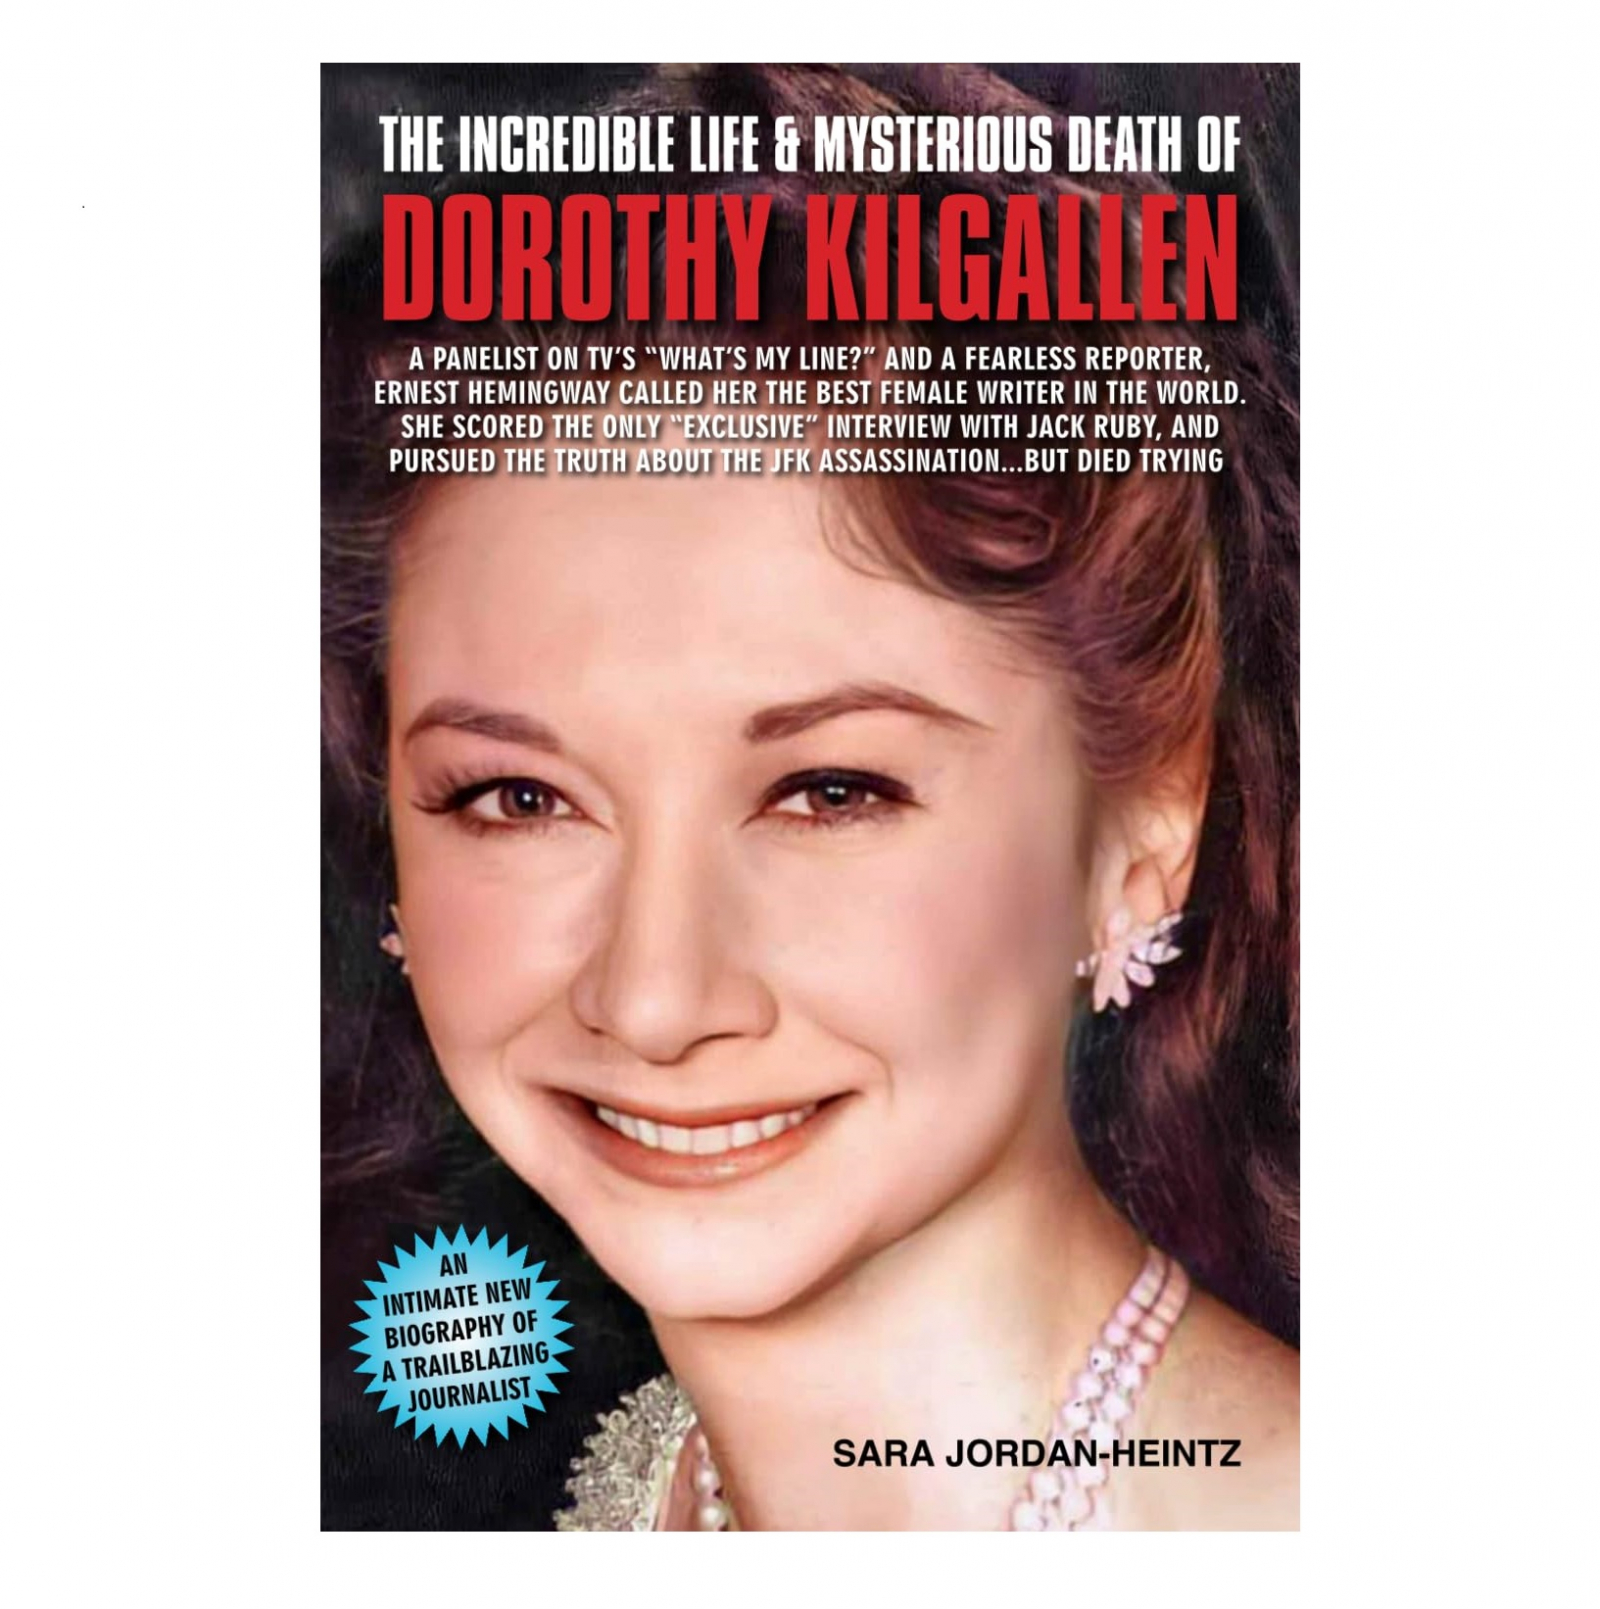 The Incredible Life and Mysterious Death of Dorothy Kilgallen